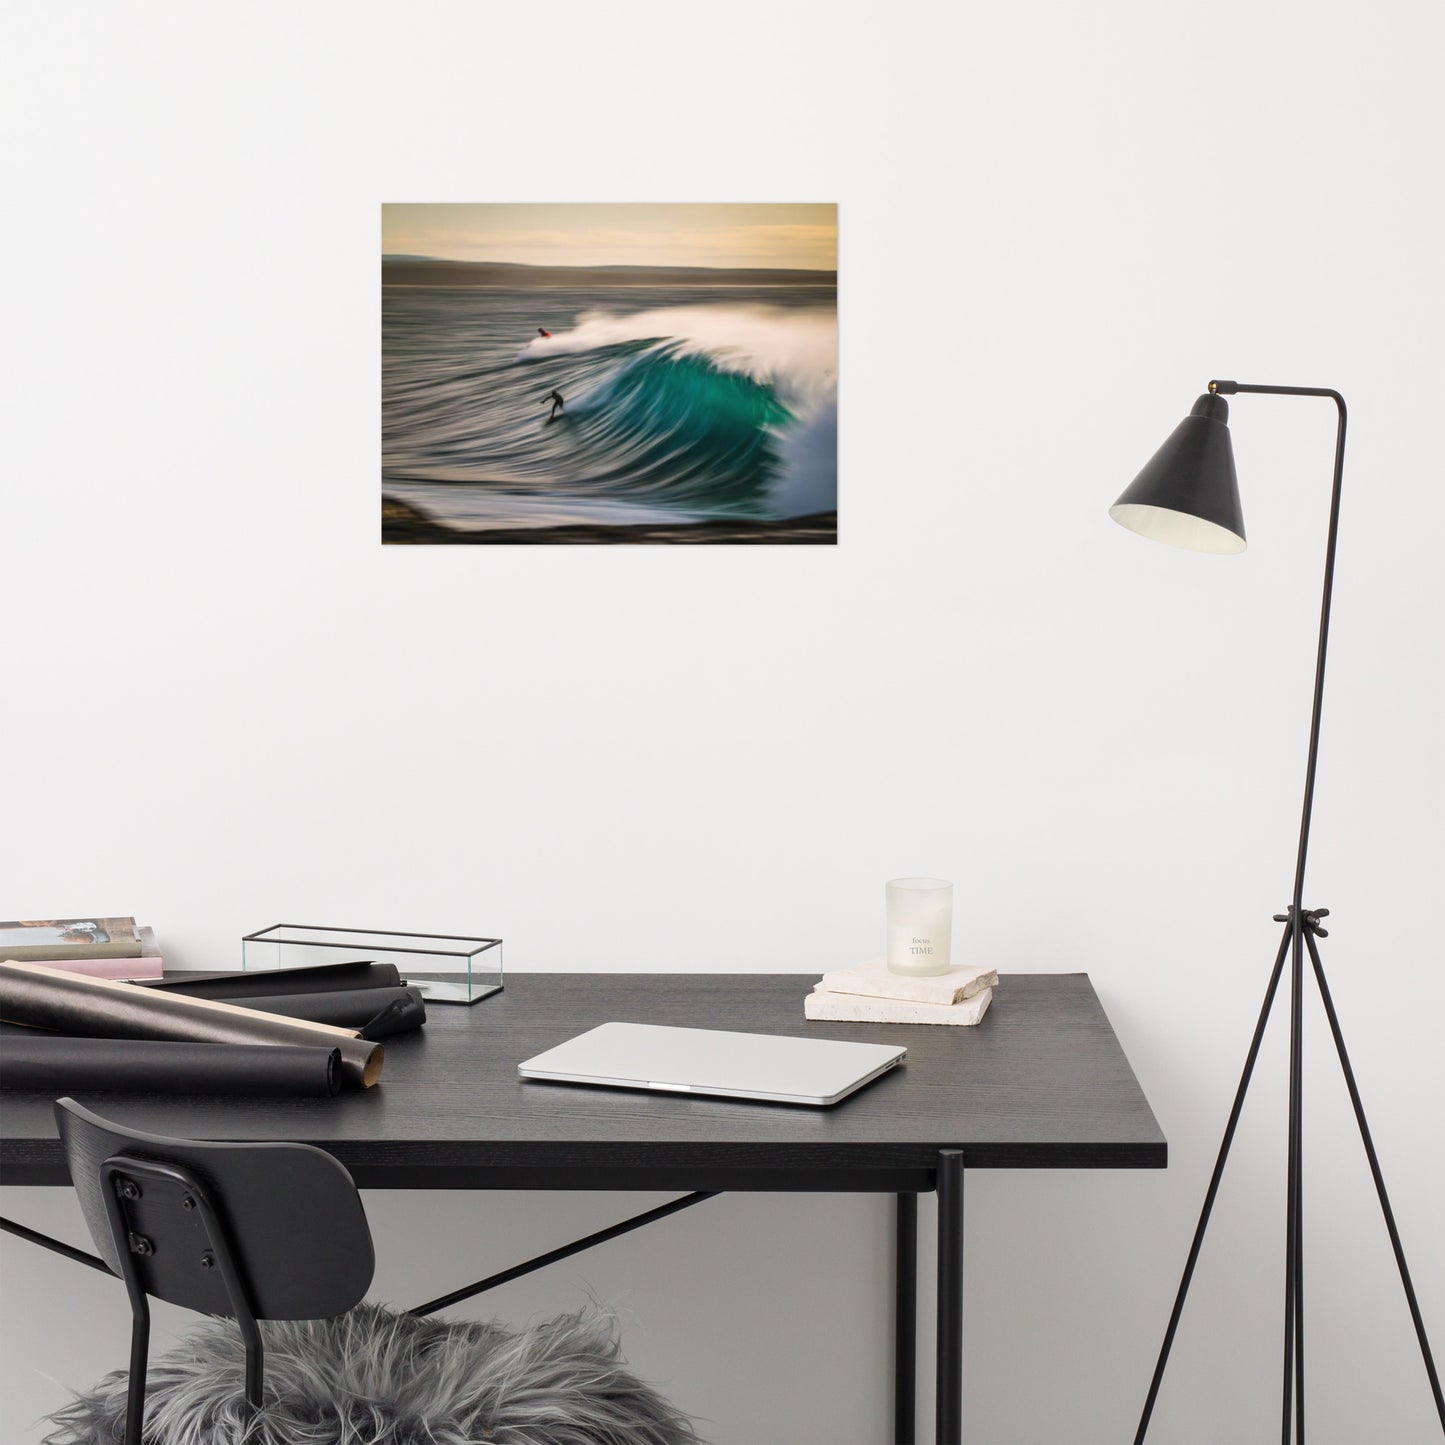 A Surfer's Dance with Light Lifestyle / Abstract / Landscape Photograph Loose Wall Art Print